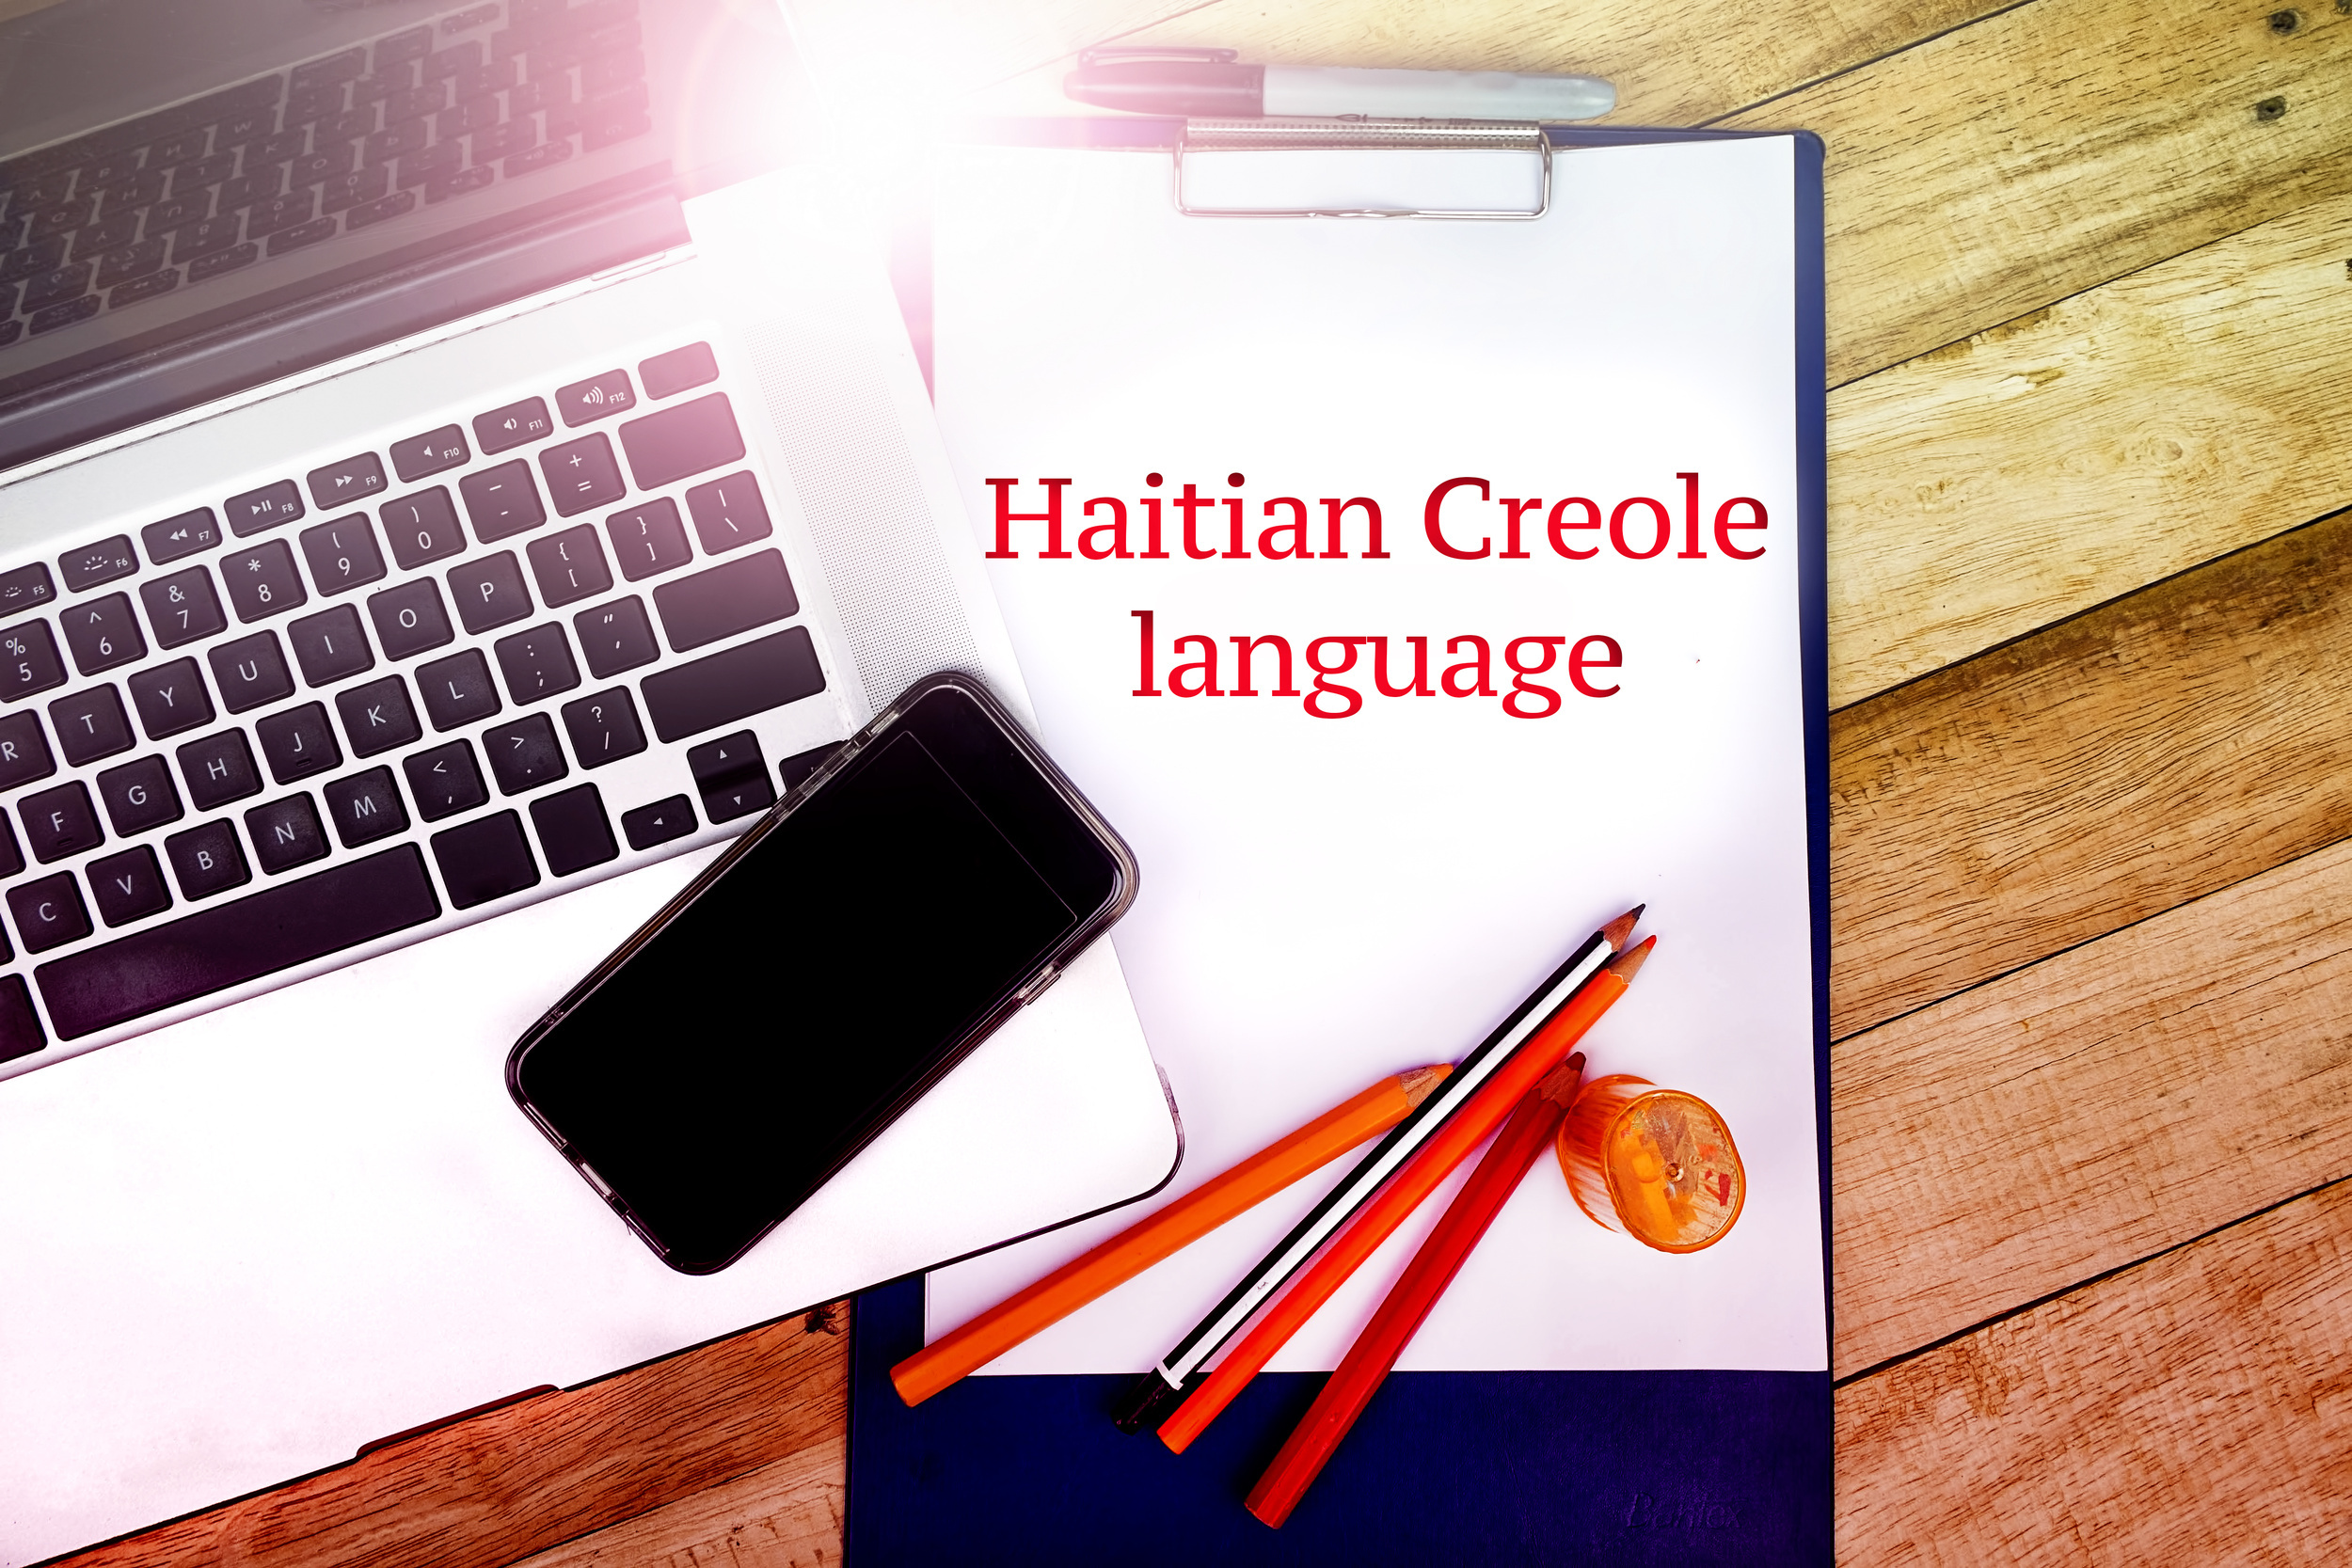 <p>Haitian Creole, one of the languages spoken in Haiti, is spoken by millions of people around the globe, and it can be learned by English speakers in less than a year. It takes vocabulary from a variety of familiar languages, and it features simple grammatical rules. </p><p>You may also like: <a href='https://www.yardbarker.com/lifestyle/articles/the_13_most_scenic_us_mountain_towns/s1__38605886'>The 13 most scenic US mountain towns</a></p>